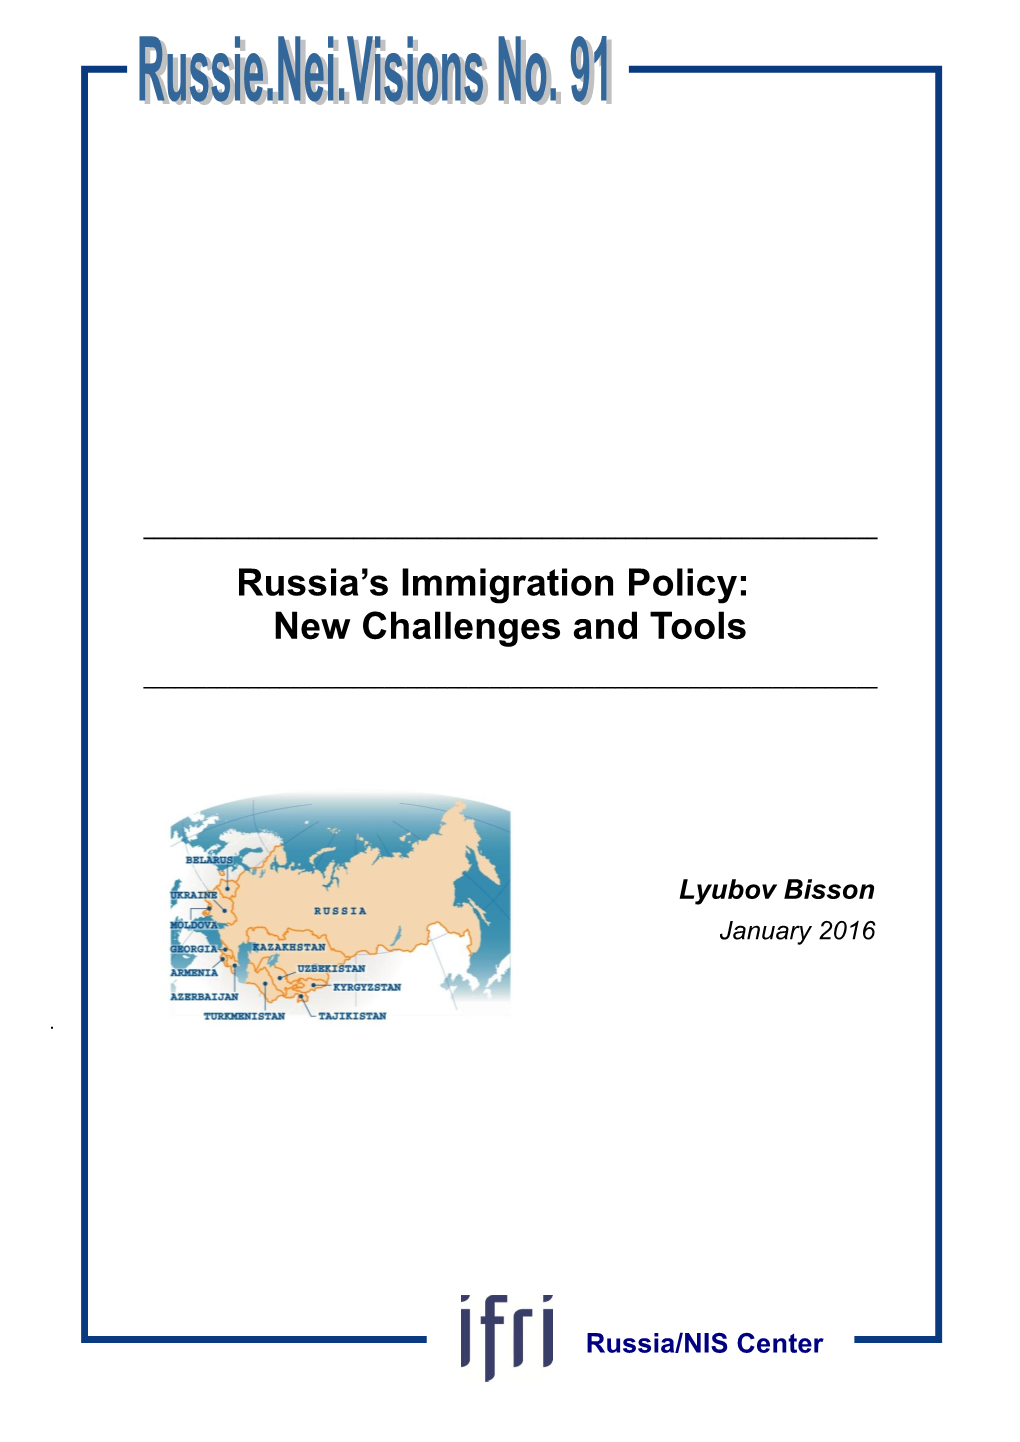 L. Bisson, “Russia's Immigration Policy: New Challenges and Tools”